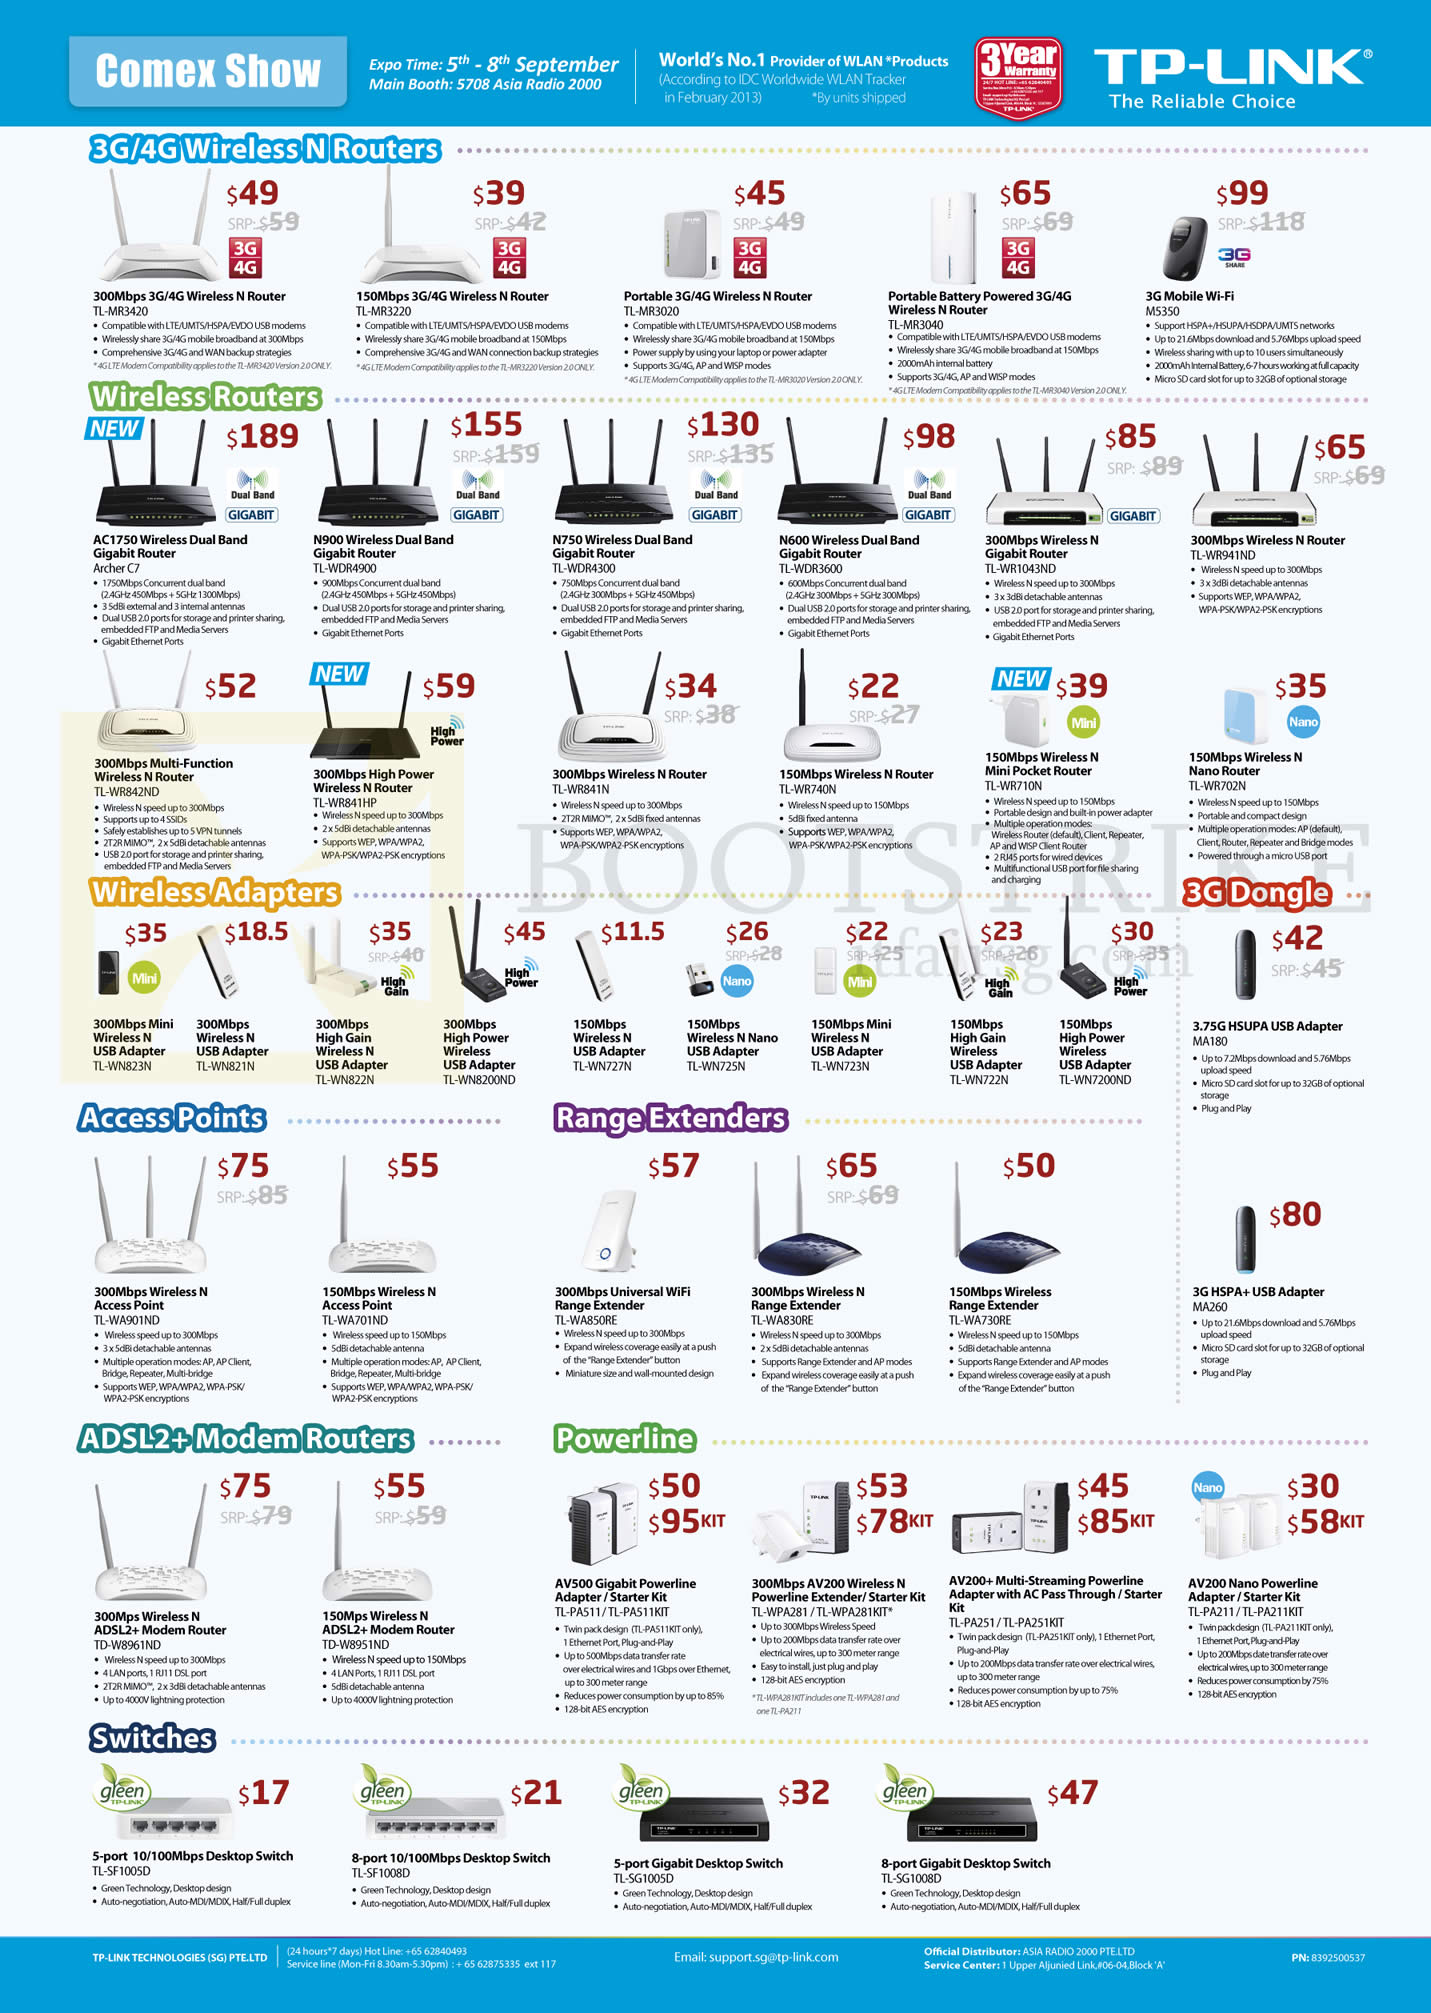 COMEX 2013 price list image brochure of Asia Radio TP-Link Networking Wireless Routers, 3G 4G, USB Adapters, 3G Dongle, Range Extenders, ADSL2 Modem Router, Powerline, Switches